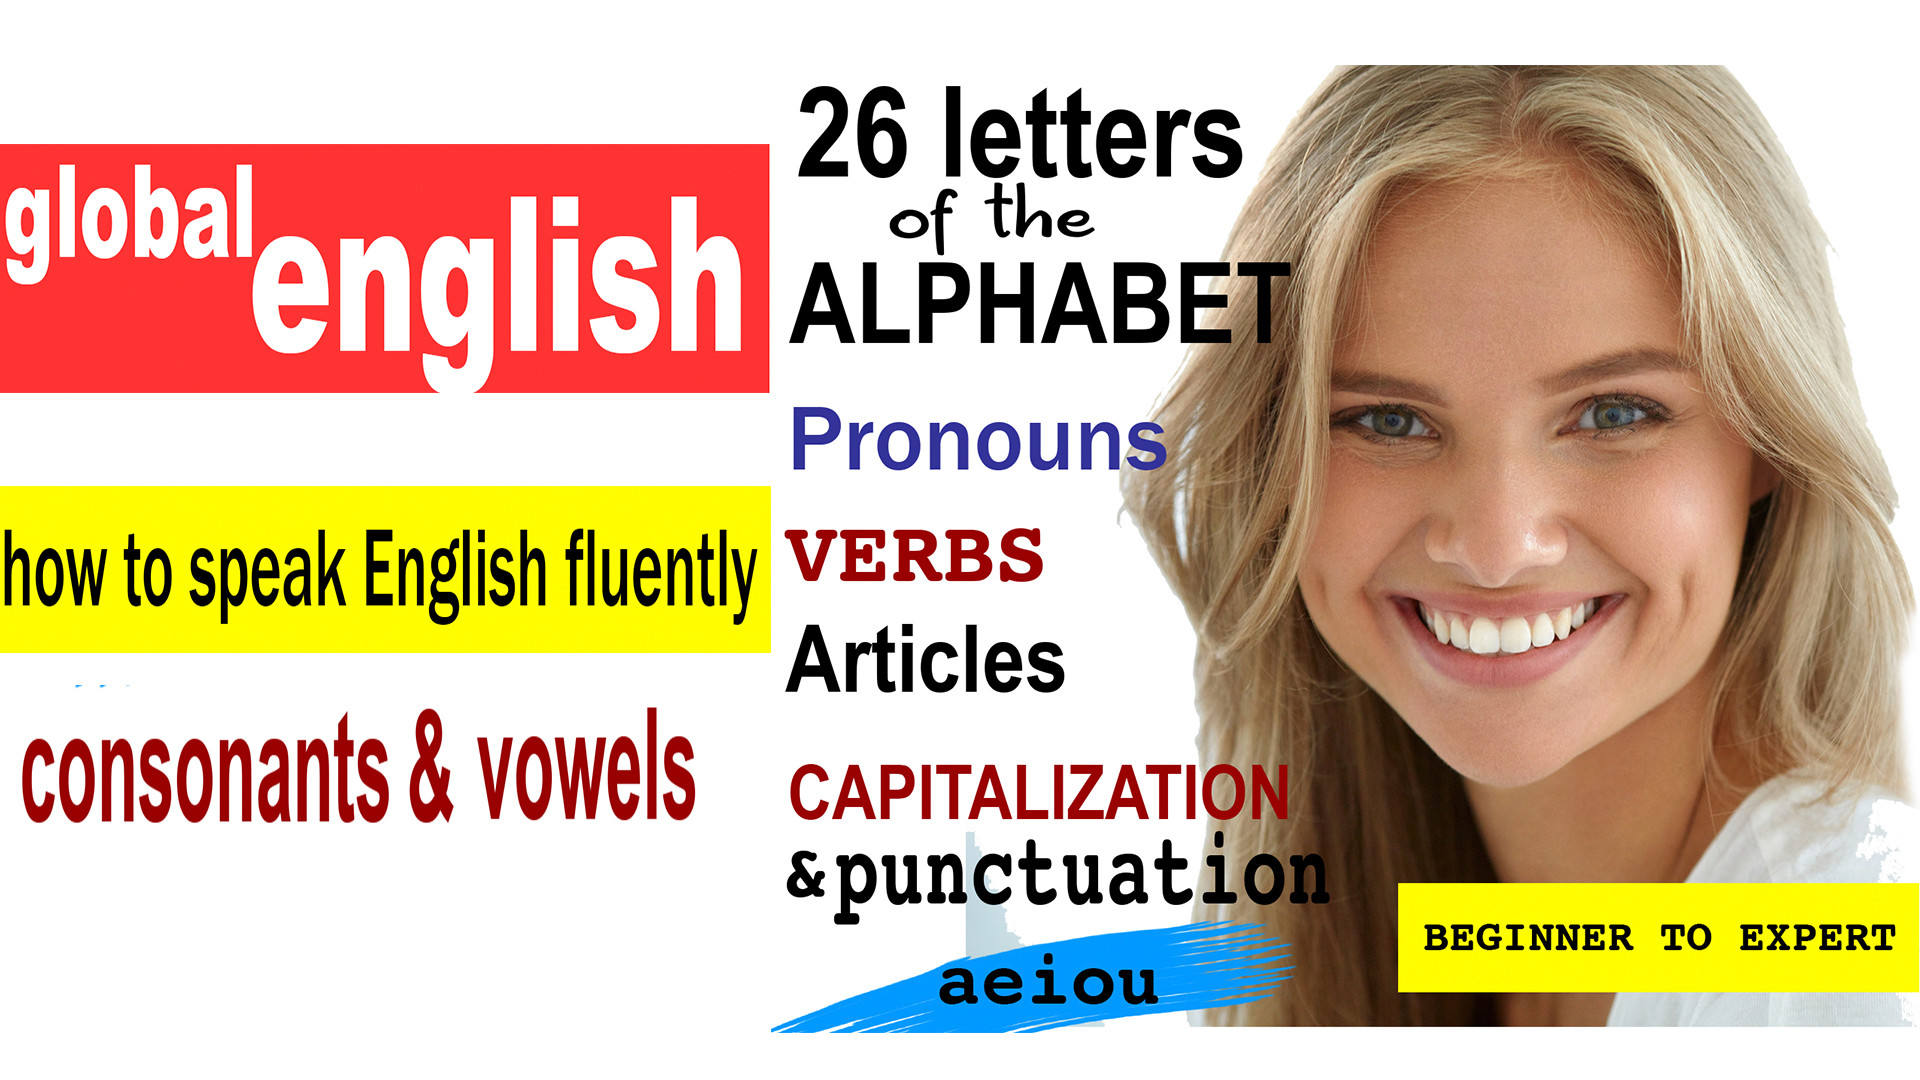 K7001 - The Alphabet, Consonants & Vowels, Capitalization & Punctuation, Personal Pronouns, The Verb 'to be', Articles